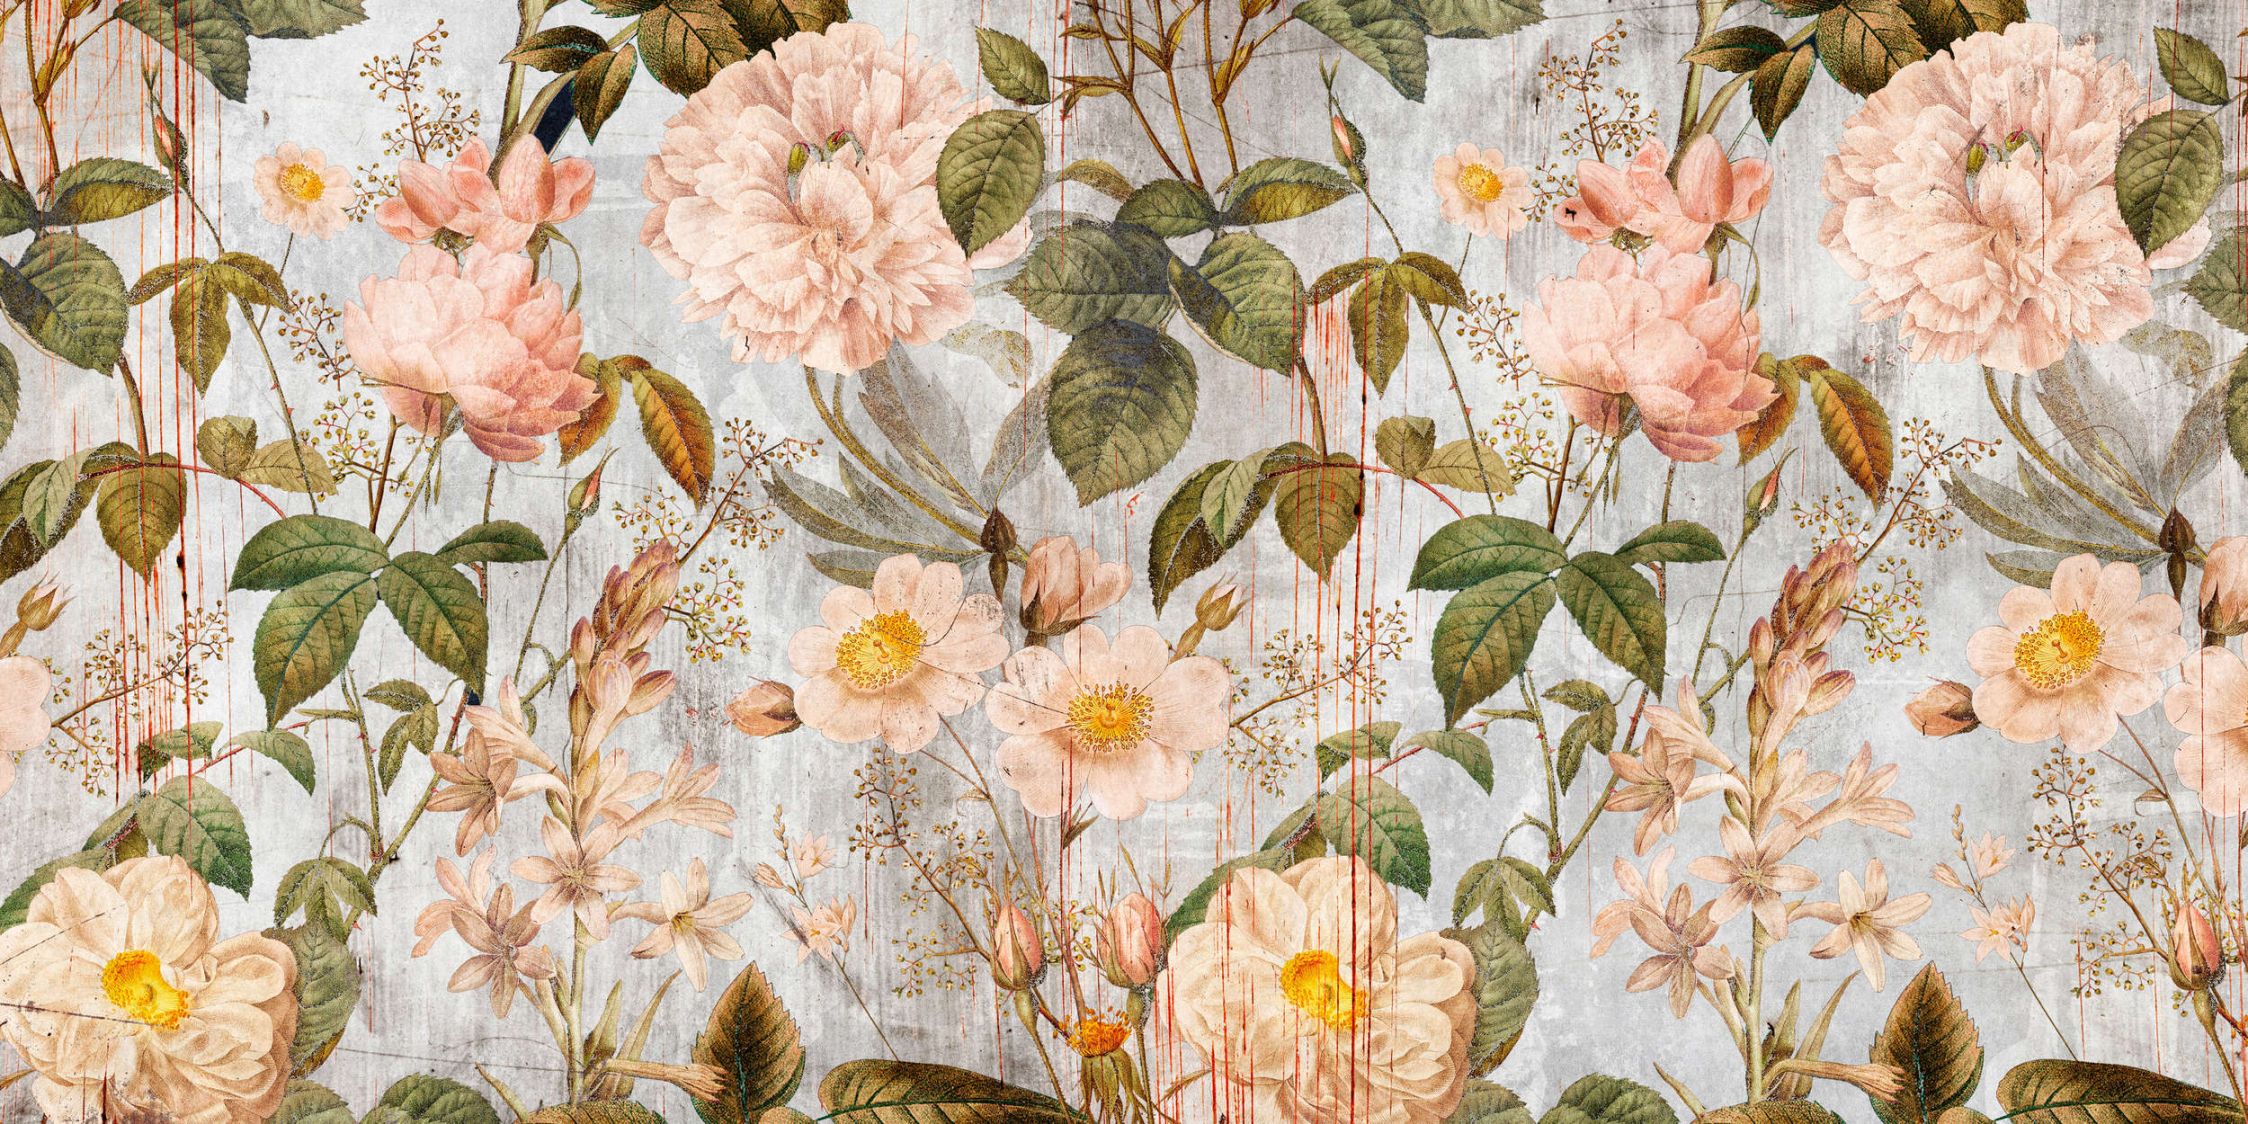             Photo wallpaper »rose« - Vintage-style floral pattern - Smooth, slightly pearlescent non-woven fabric
        